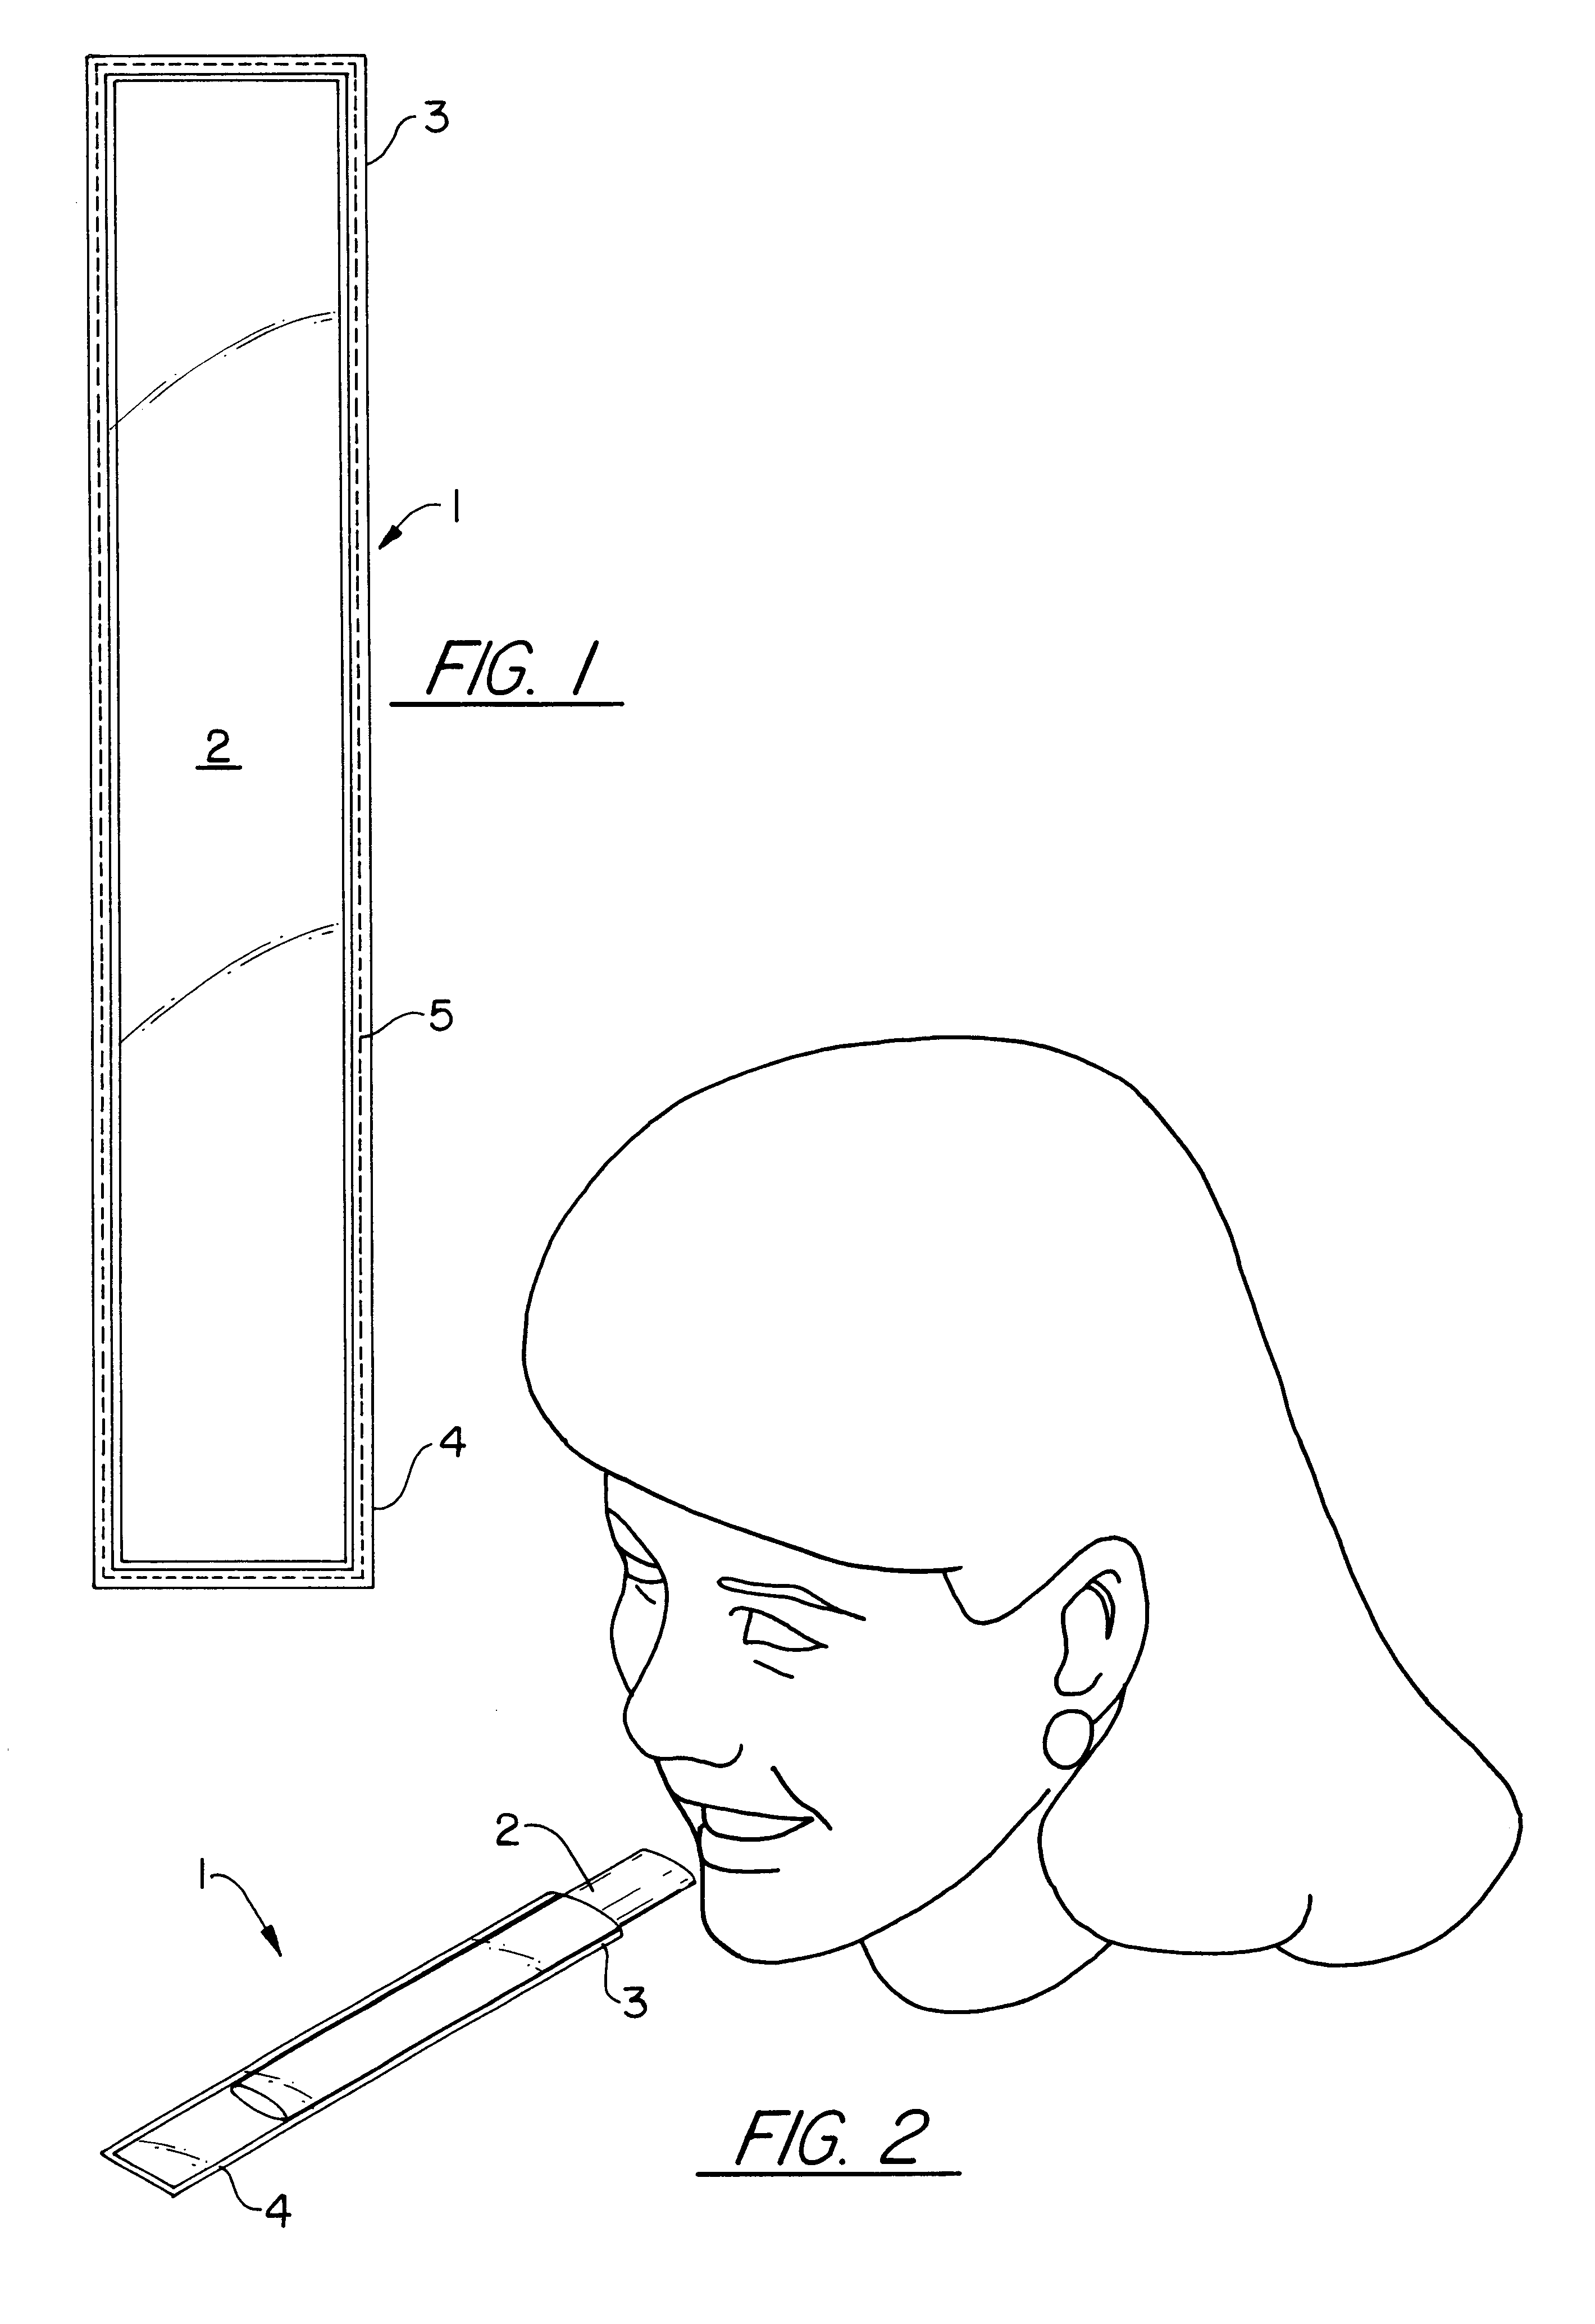 Frozen product and method of oral delivery of active ingredients